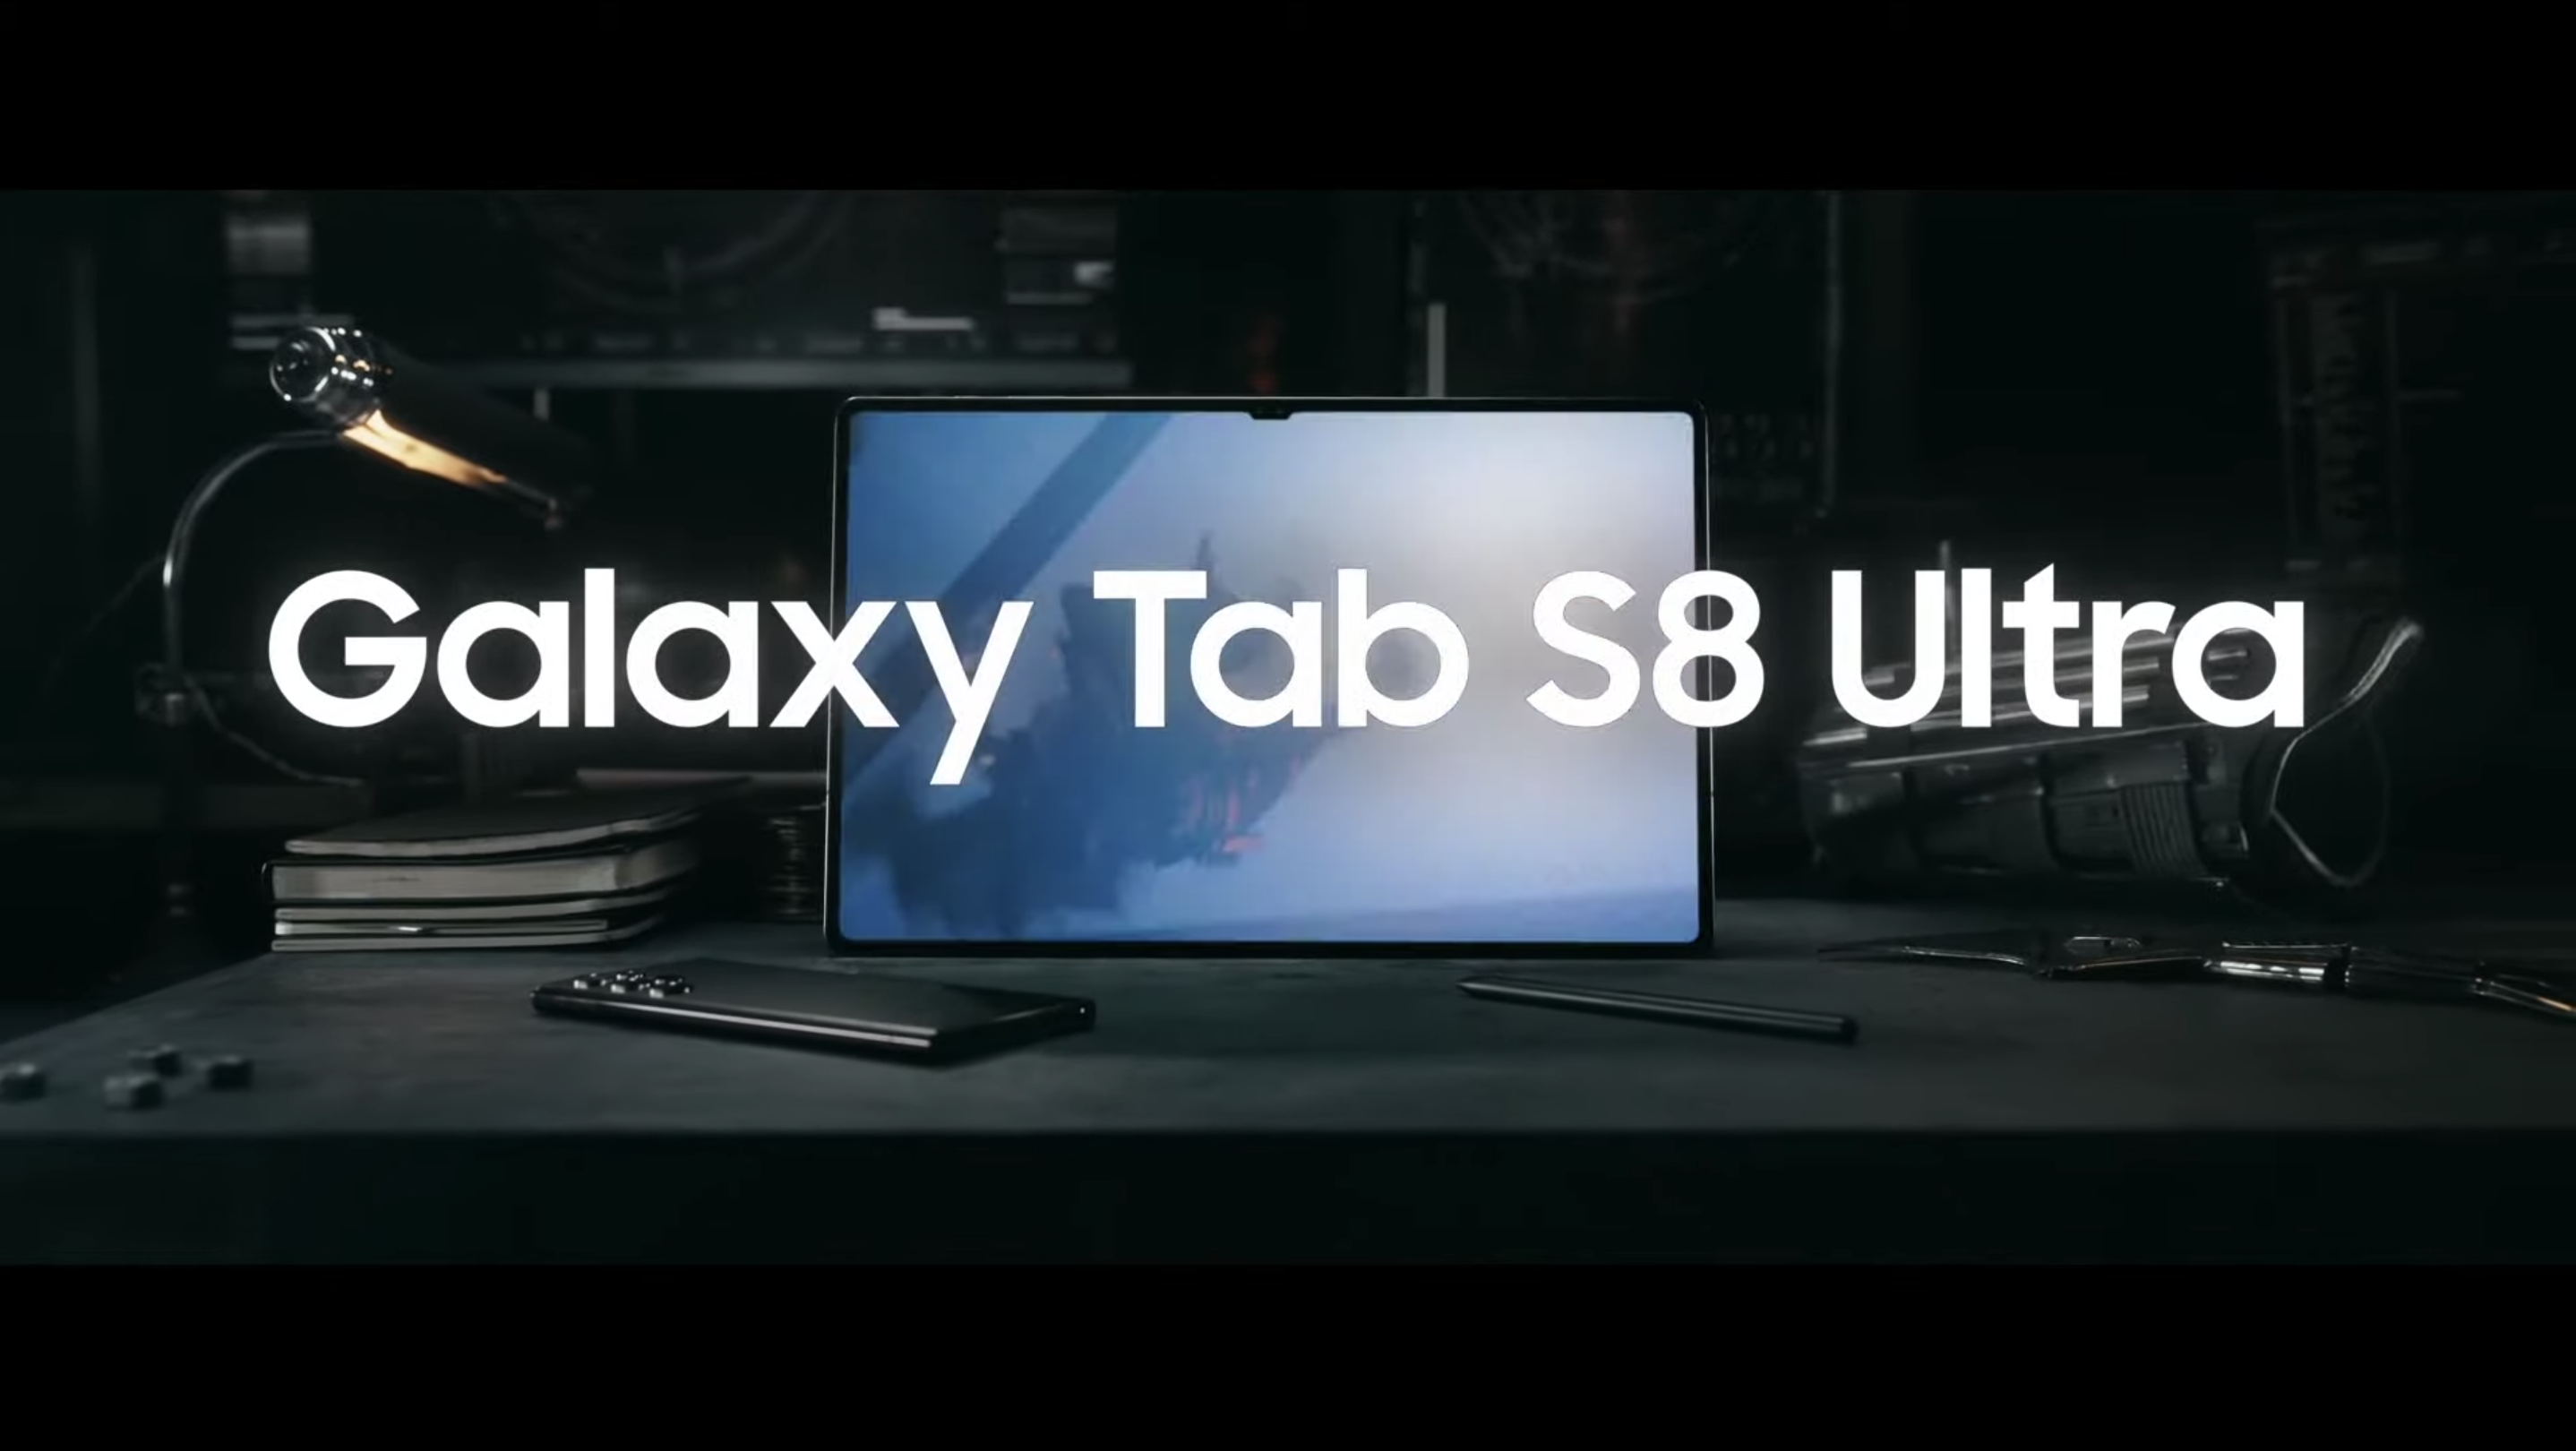 Samsung Galaxy Tab S8 ultra and + reveals